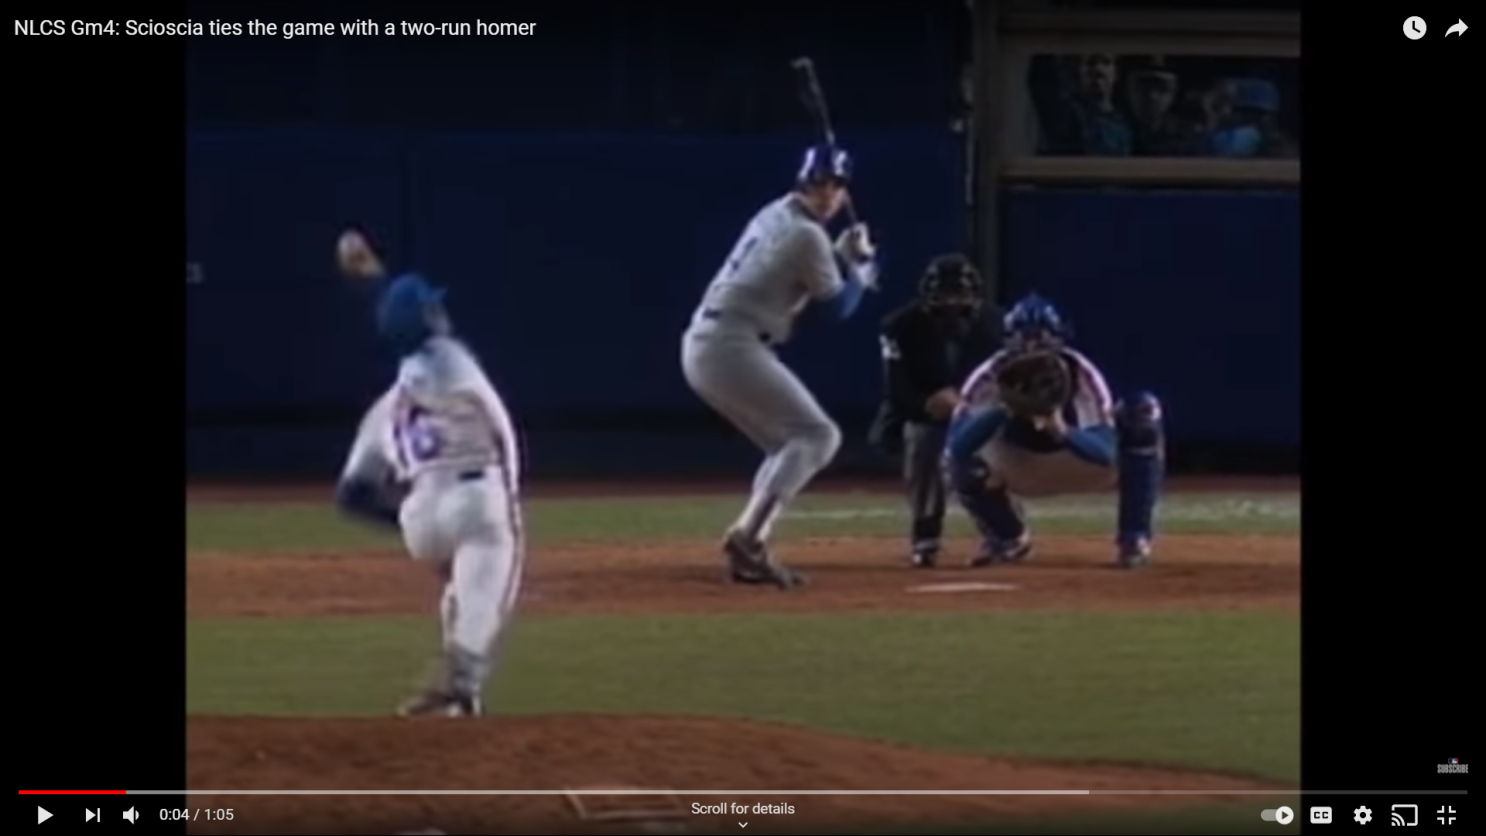 Keith Hernandez's top Mets moments, No. 1: Eighty-sixing the Sox